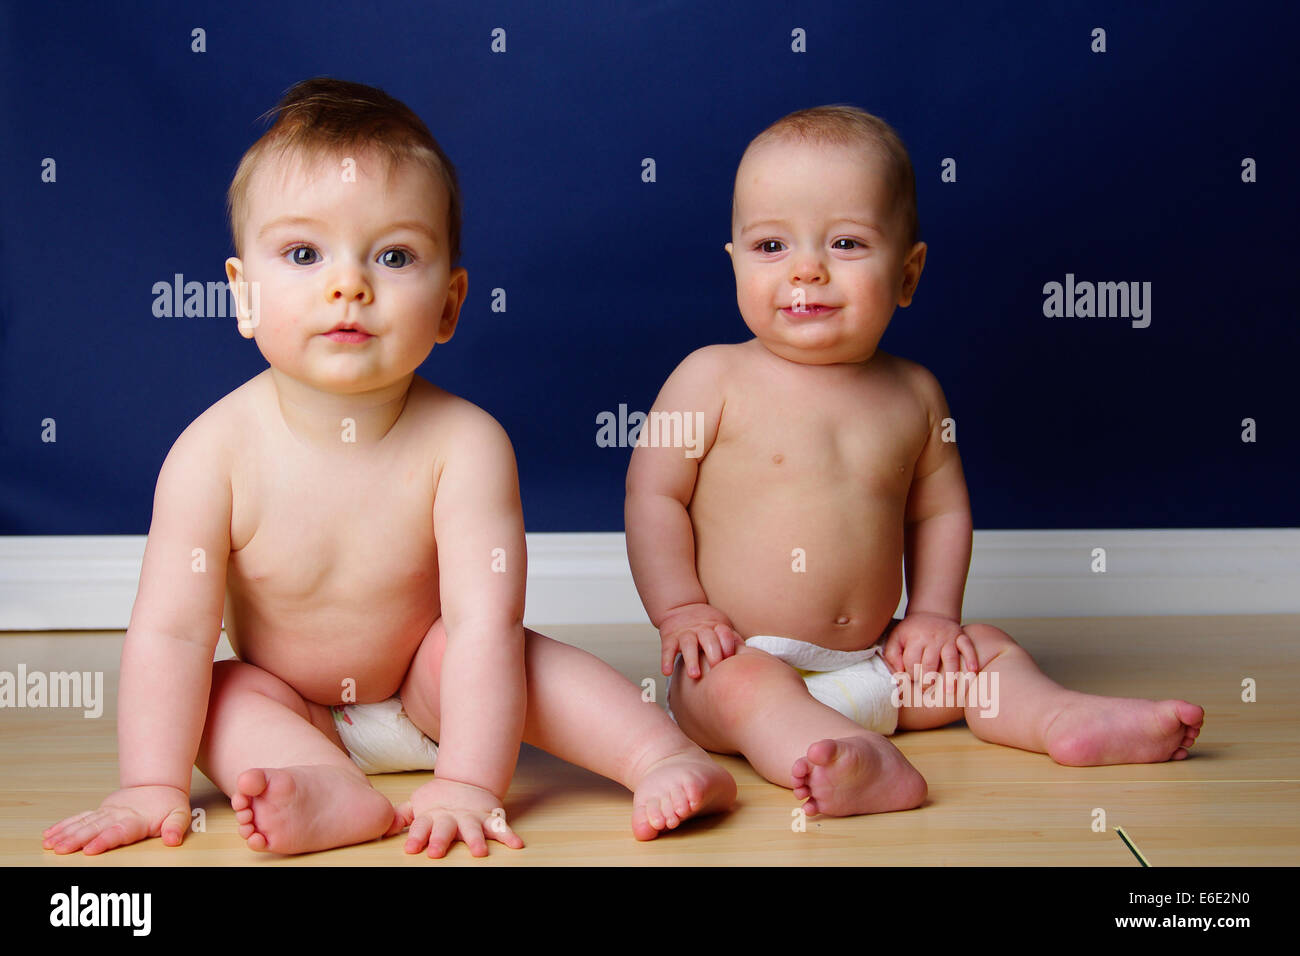 Fraternal twin 9 month old baby boys sitting side by side in their diapers Stock Photo